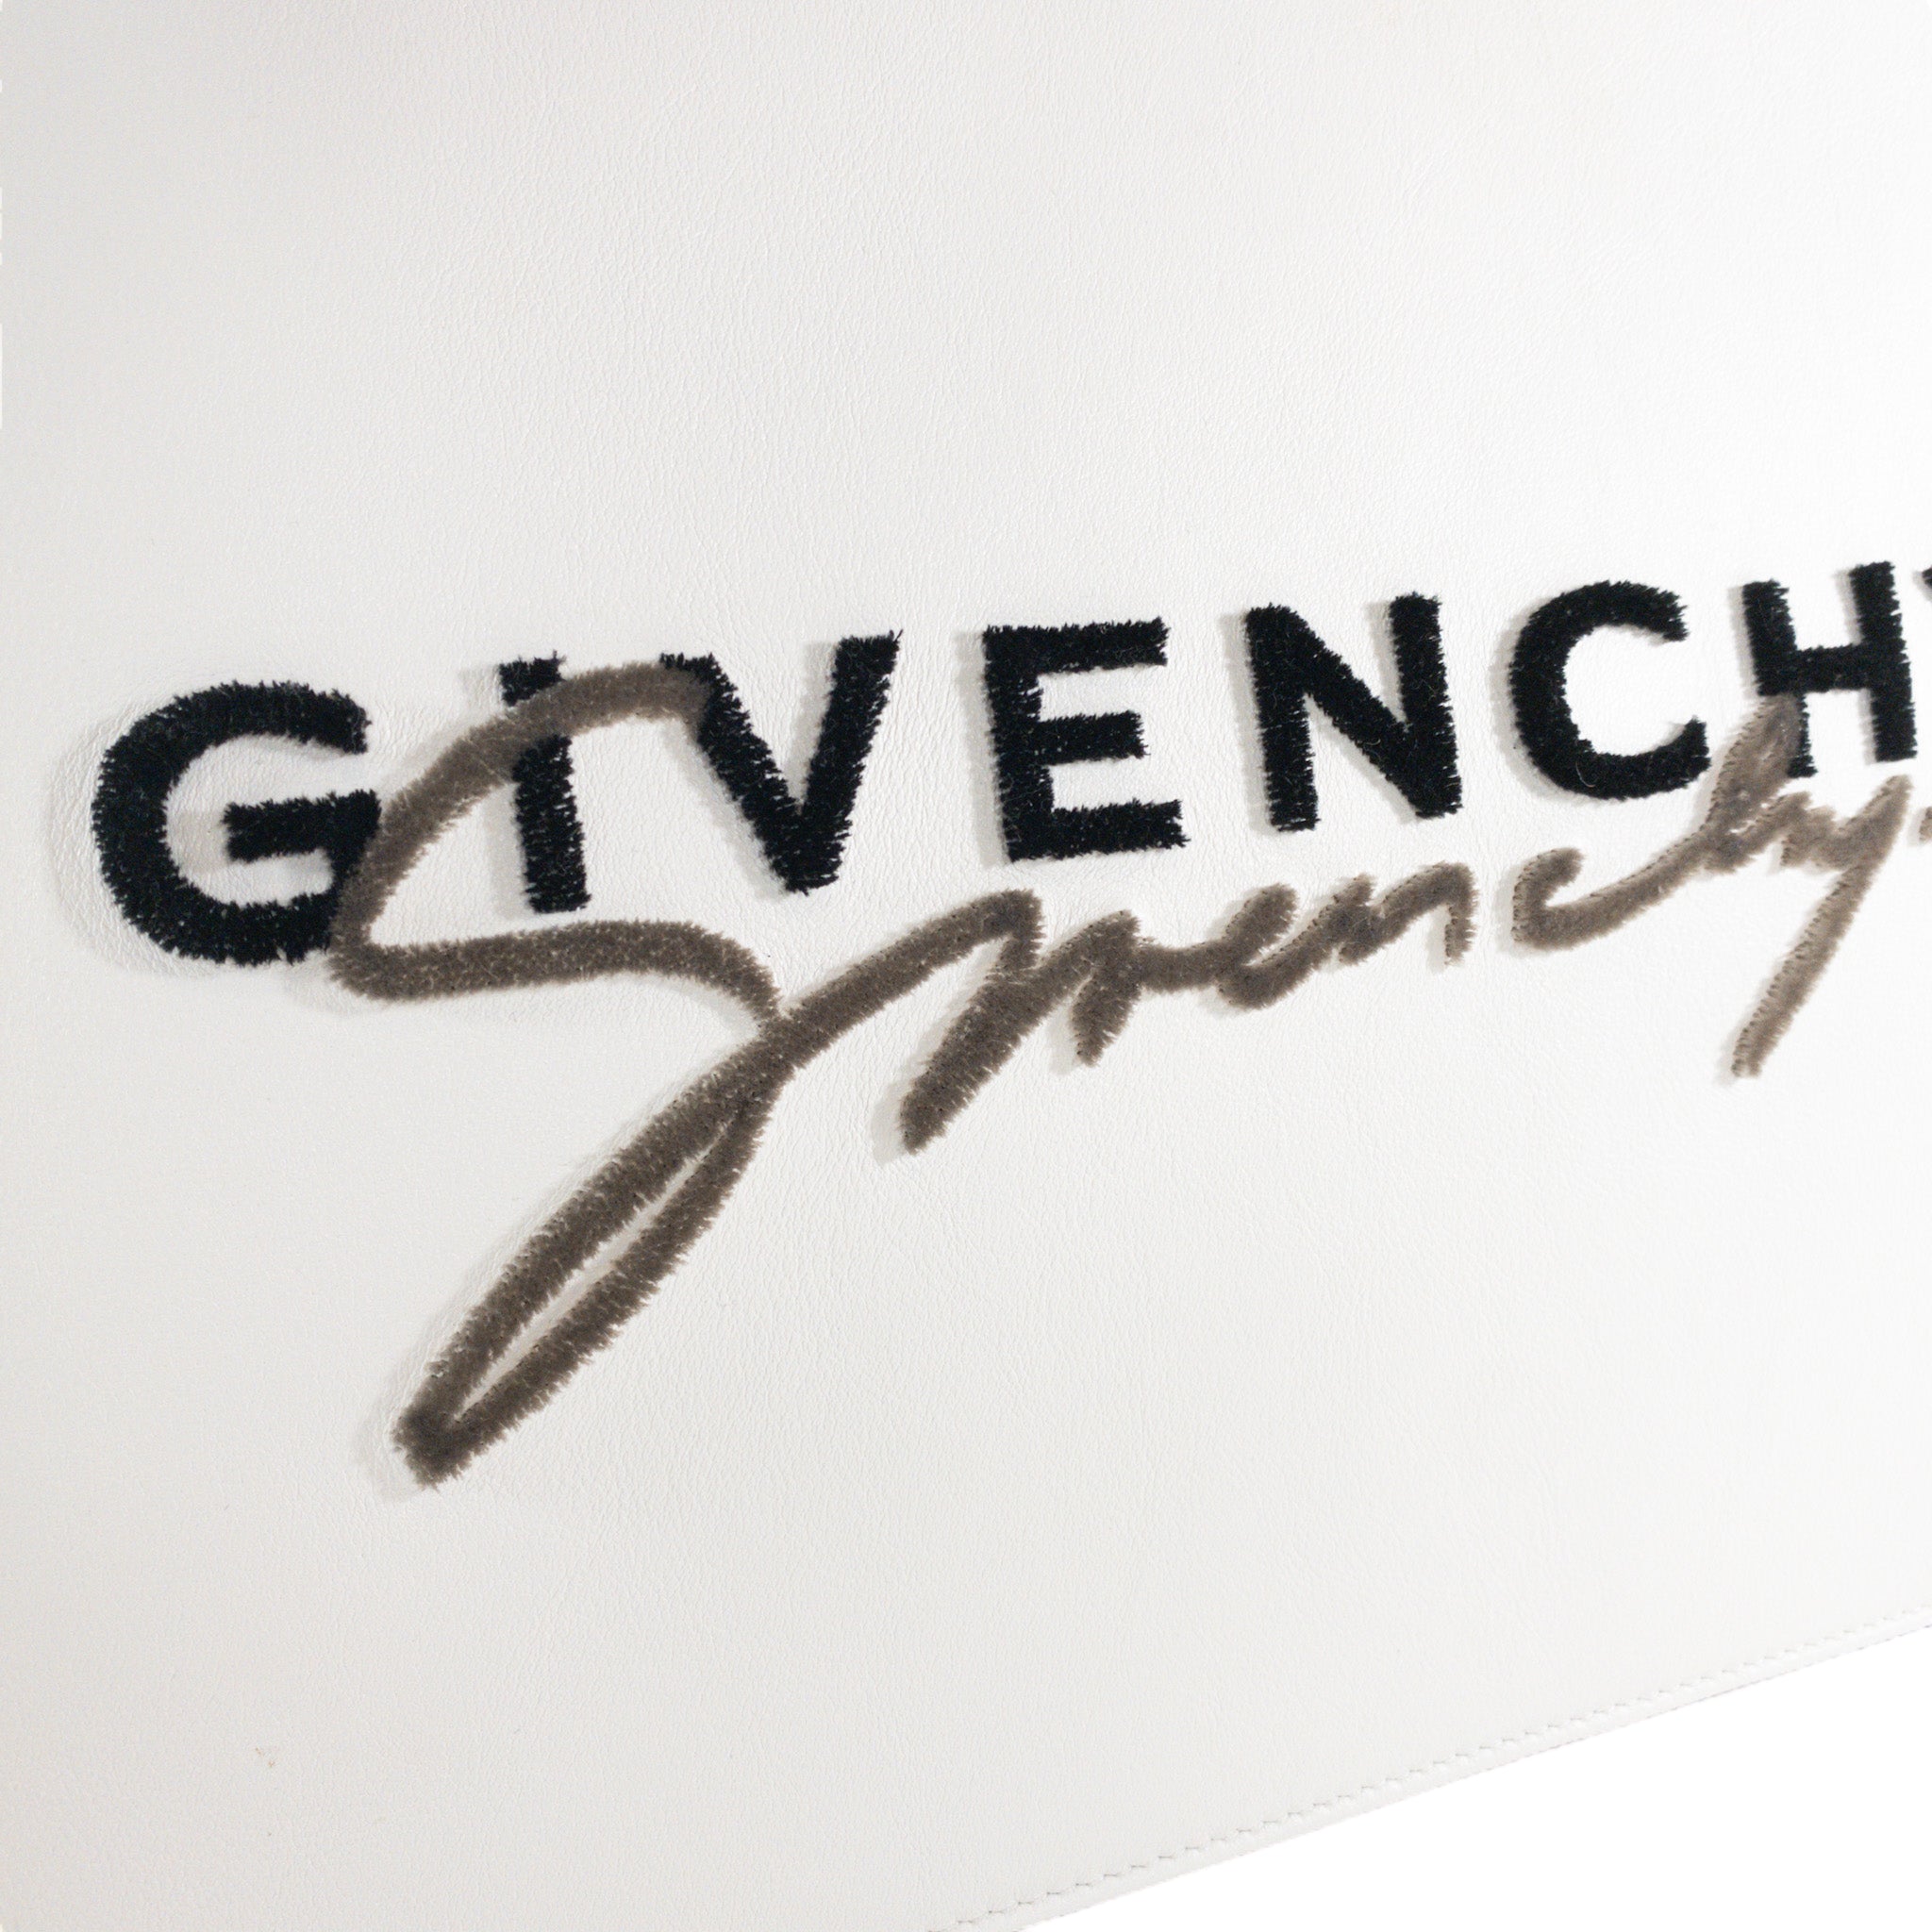 Givenchy White Leather Clutch